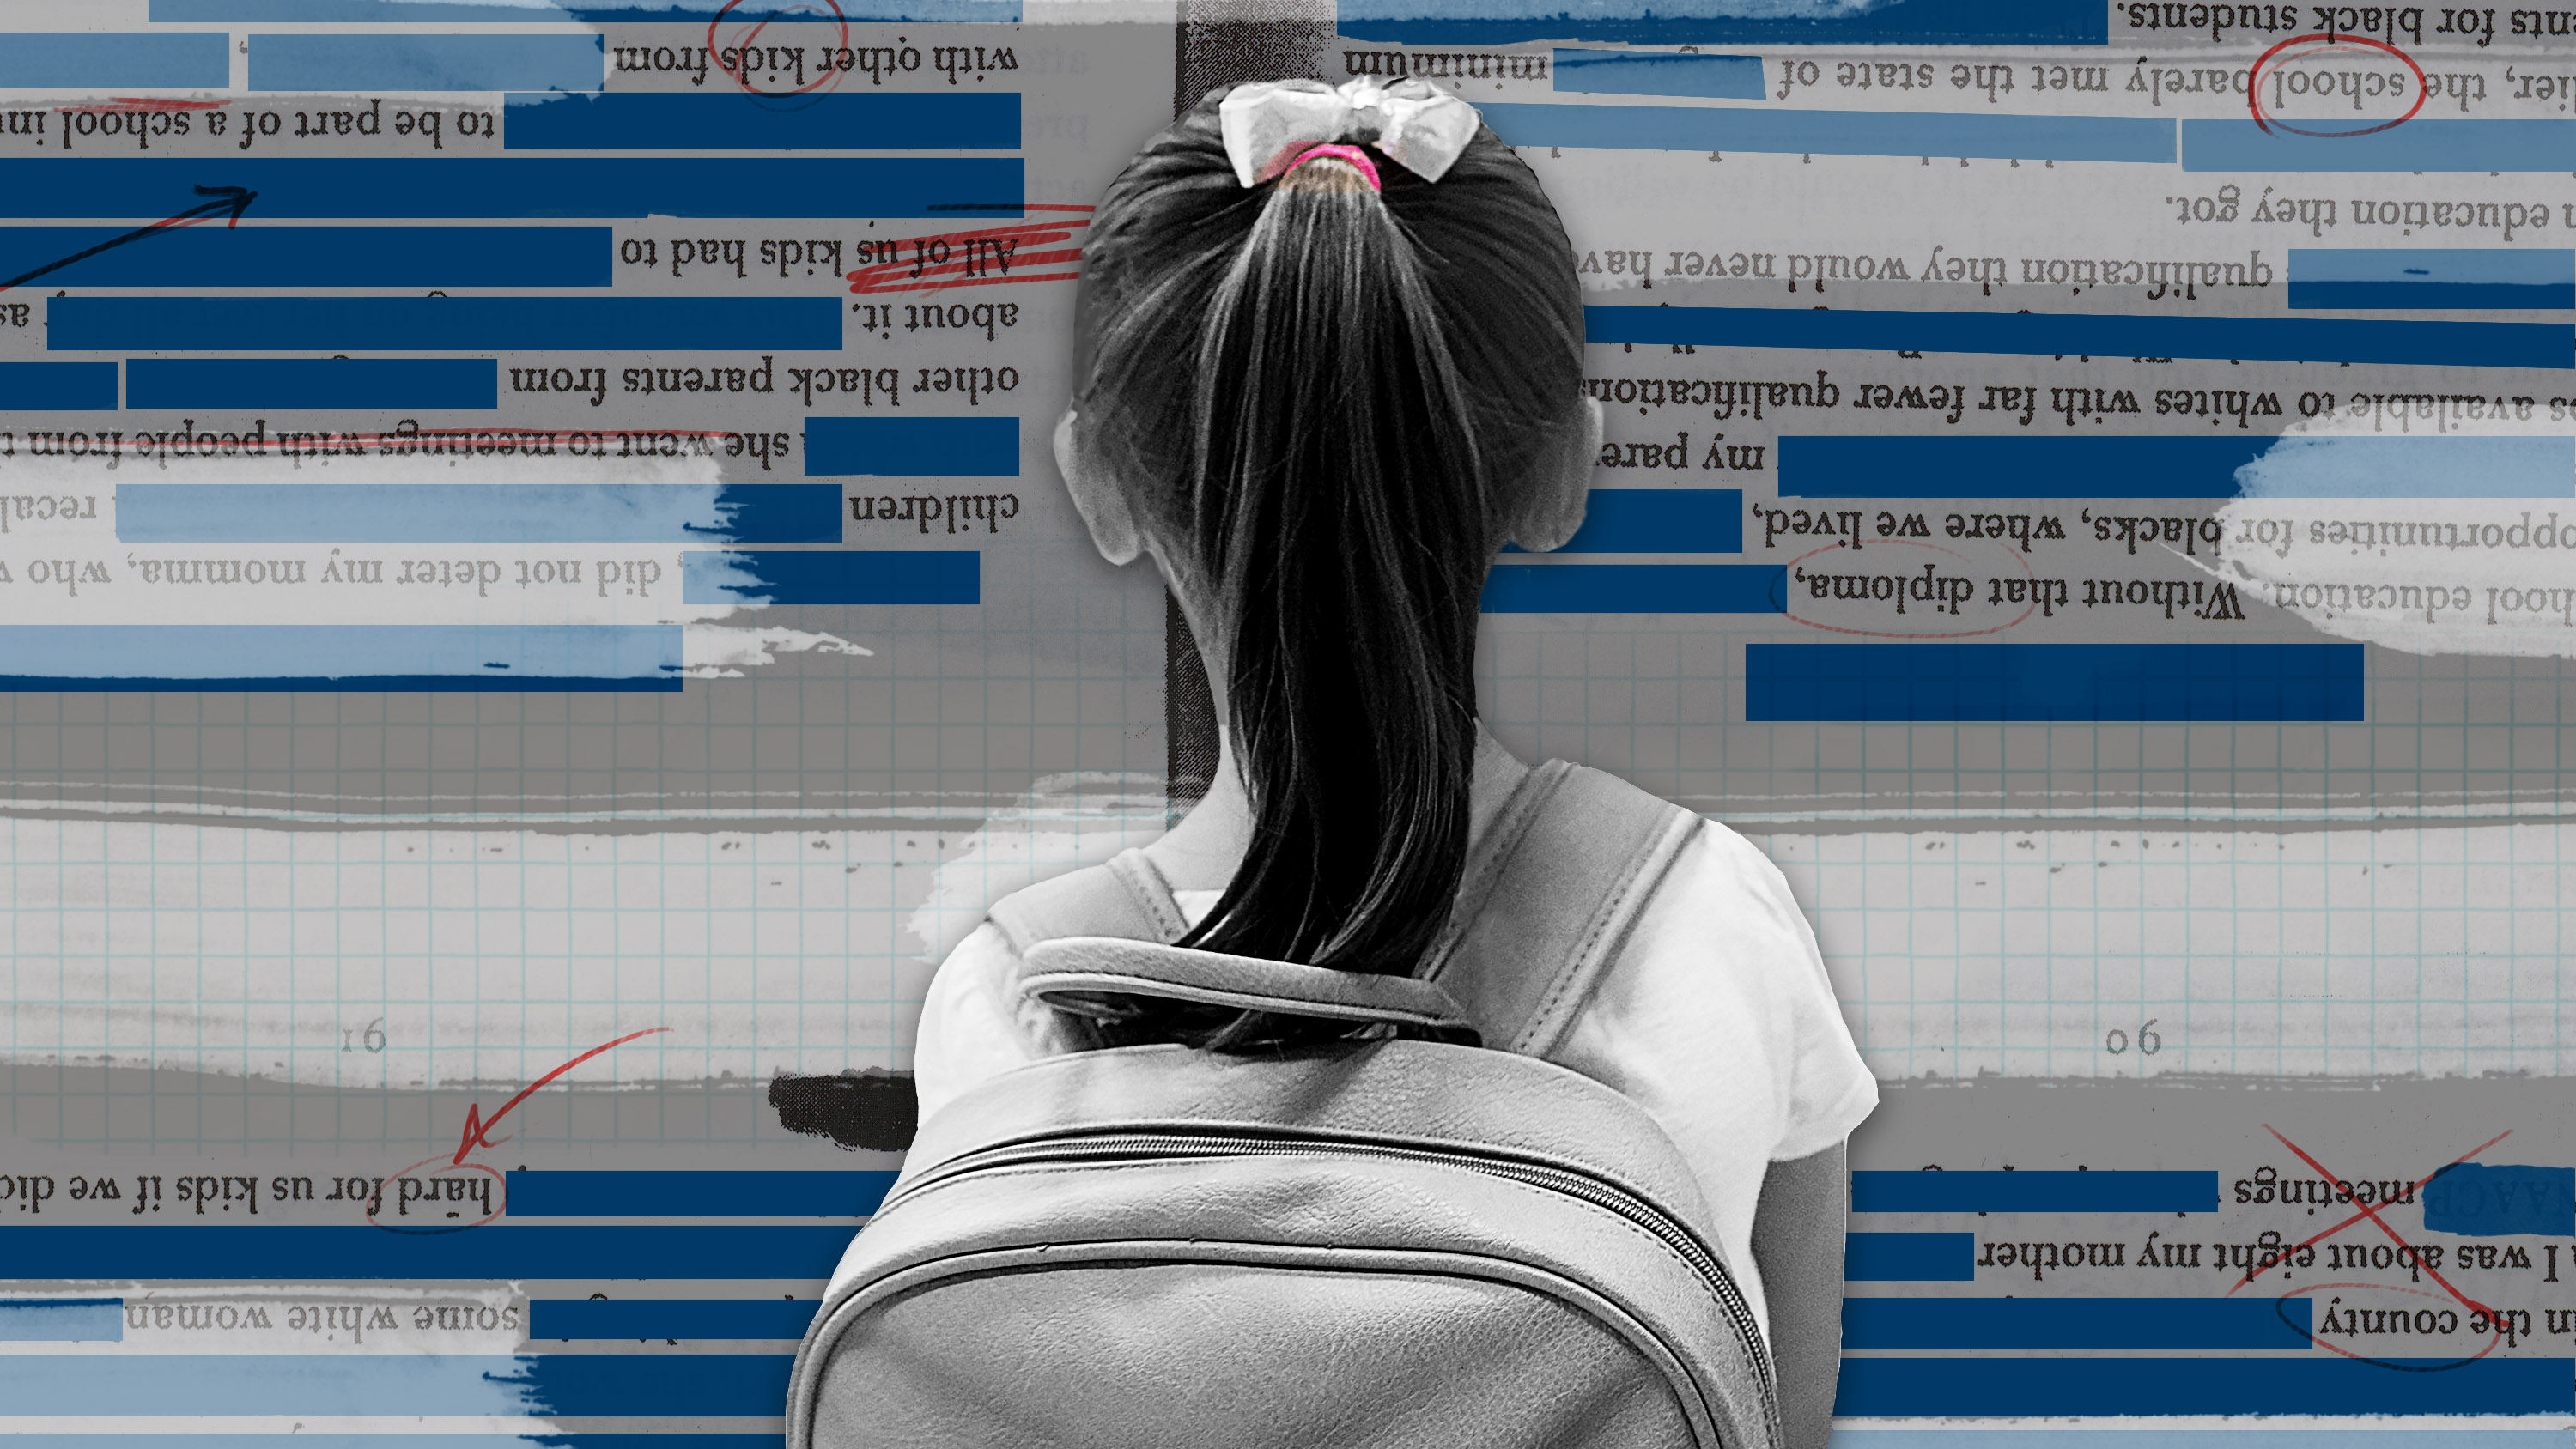 little girl with her schoolbag facing pages redacted in facebook blue